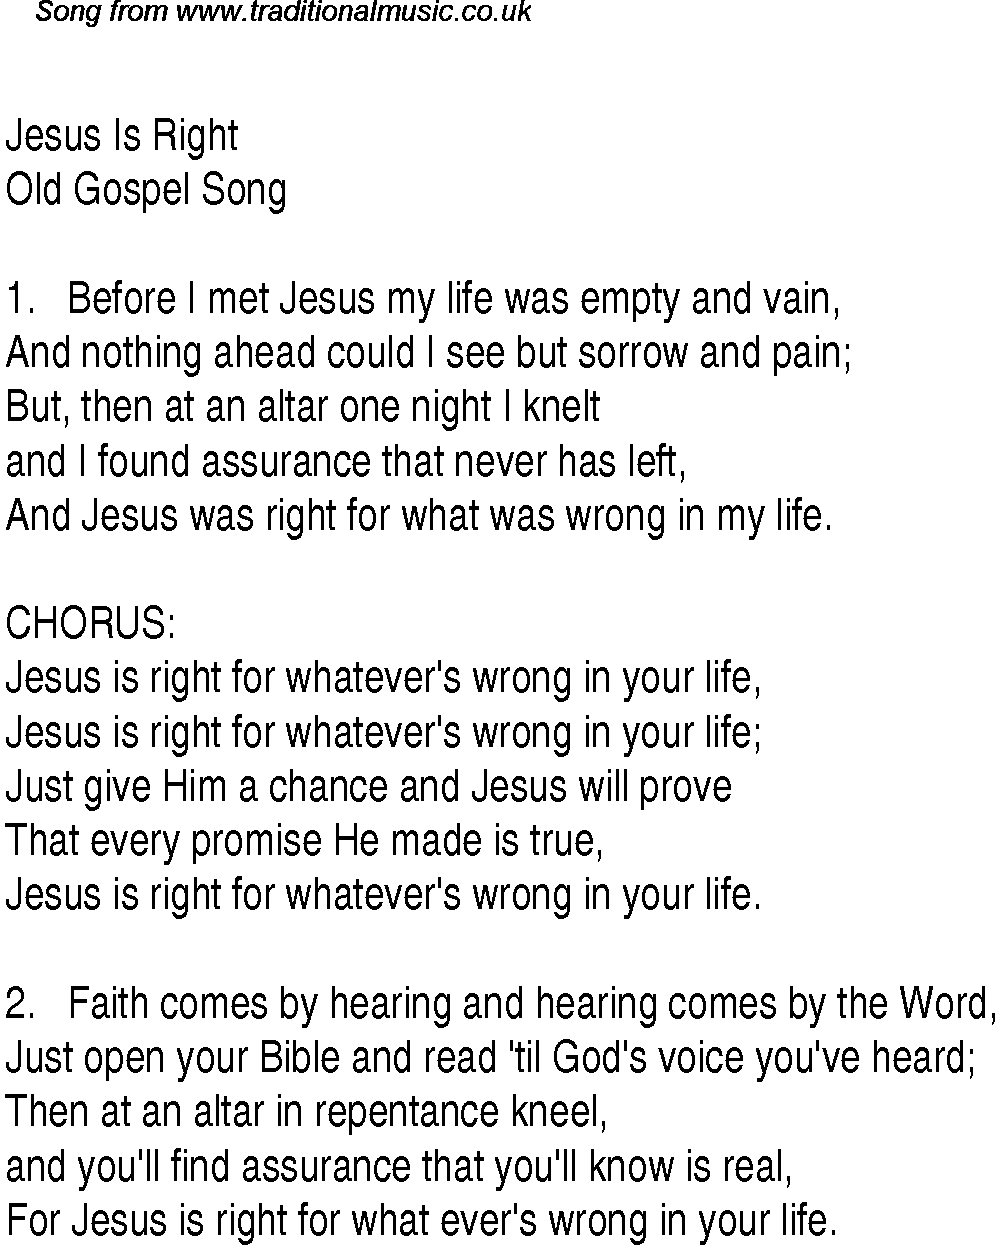 Gospel Song: jesus-is-right, lyrics and chords.